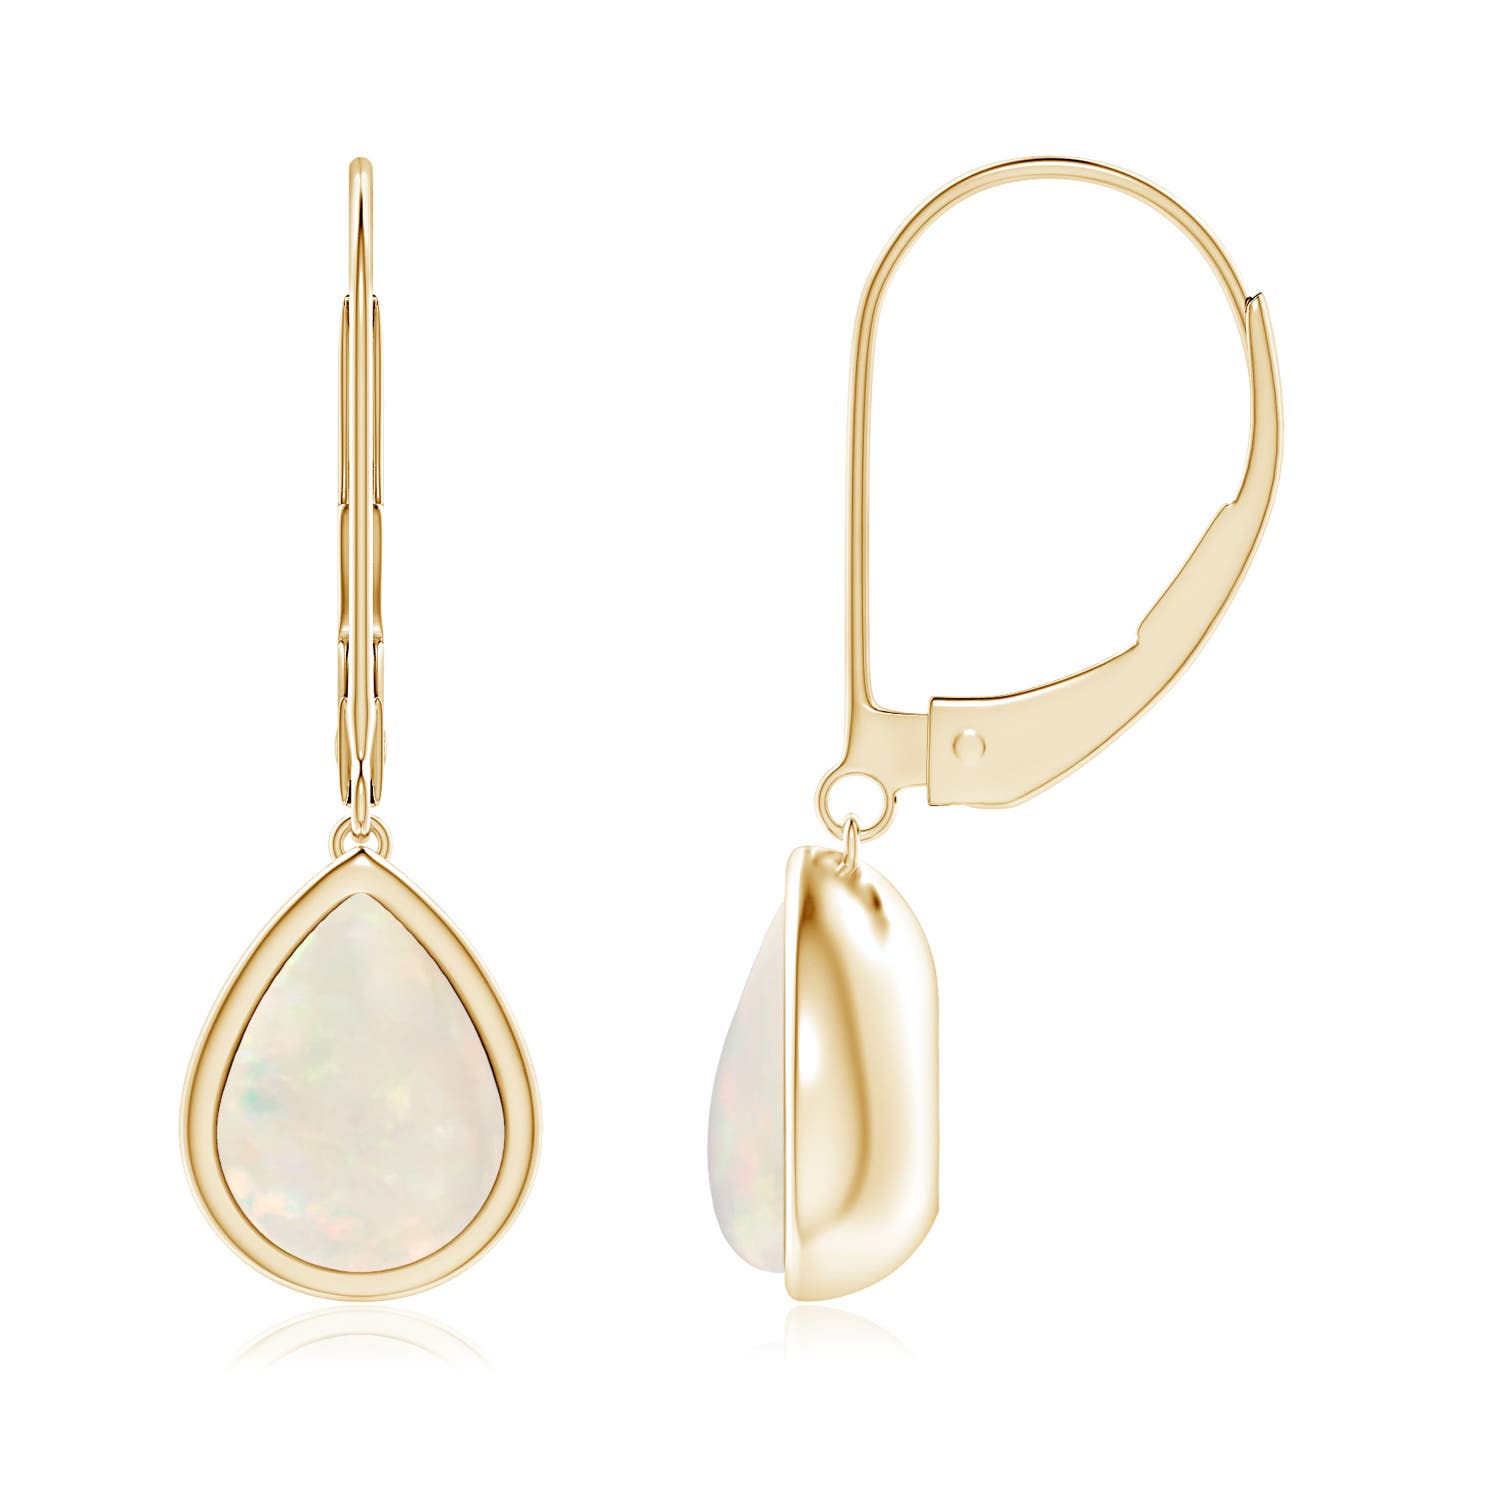 A - Opal / 1.4 CT / 14 KT Yellow Gold